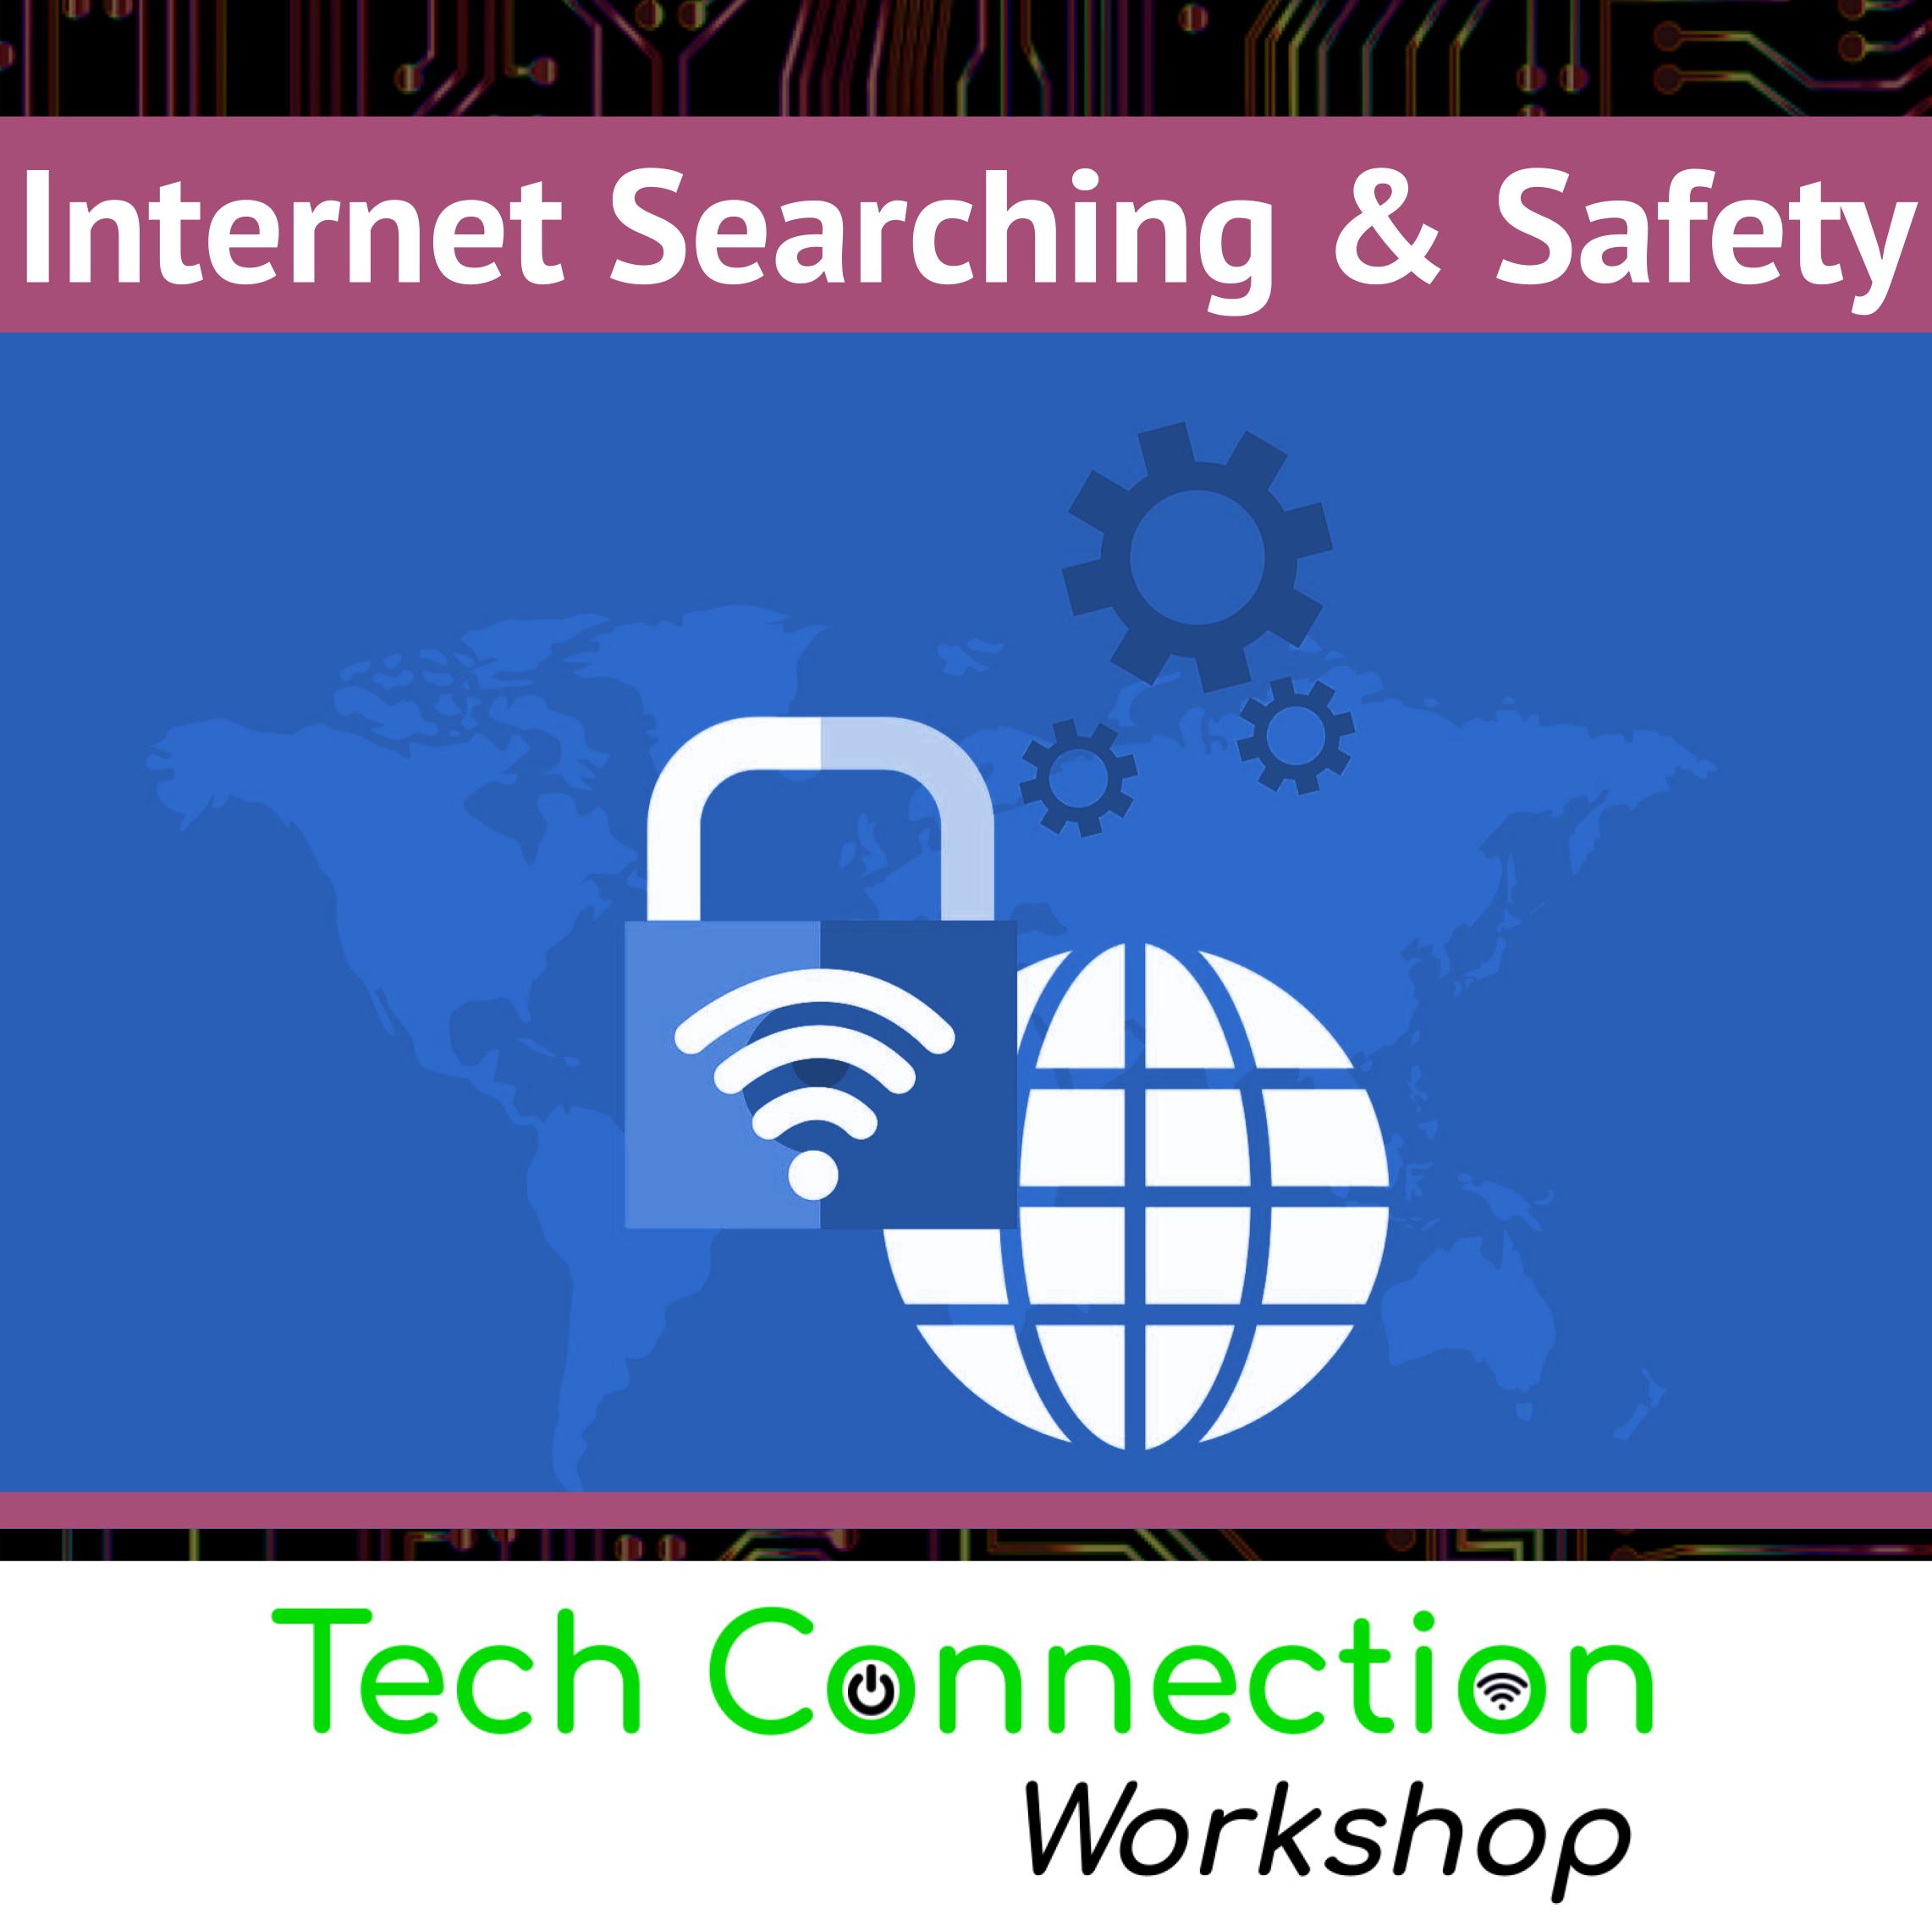 Tech Connection Workshop: Internet Searching & Safety